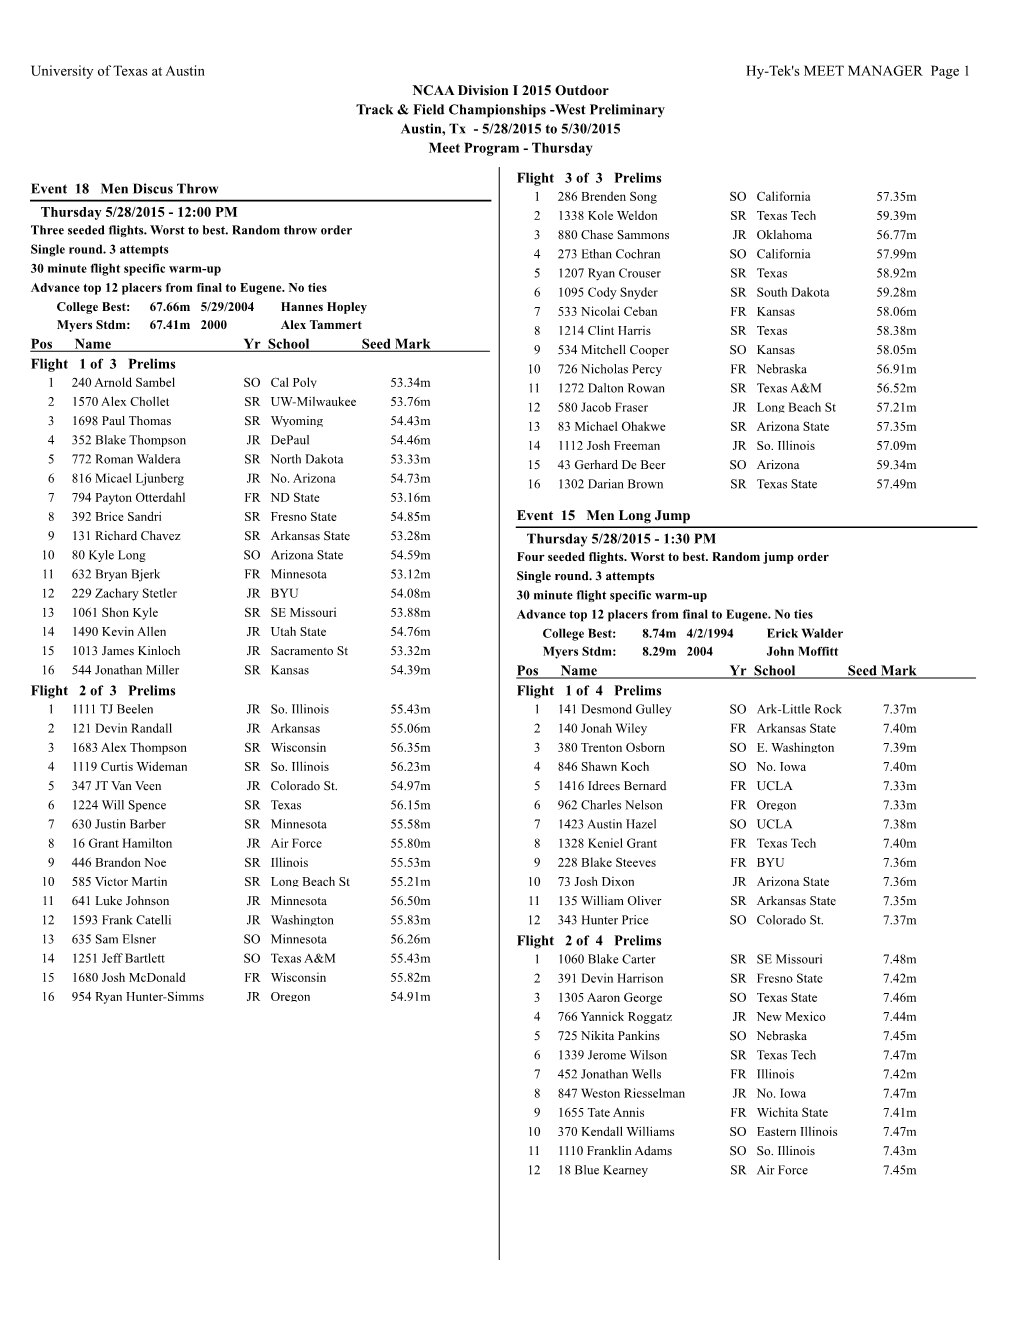 University of Texas at Austin Hy-Tek's MEET MANAGER Page 1 NCAA